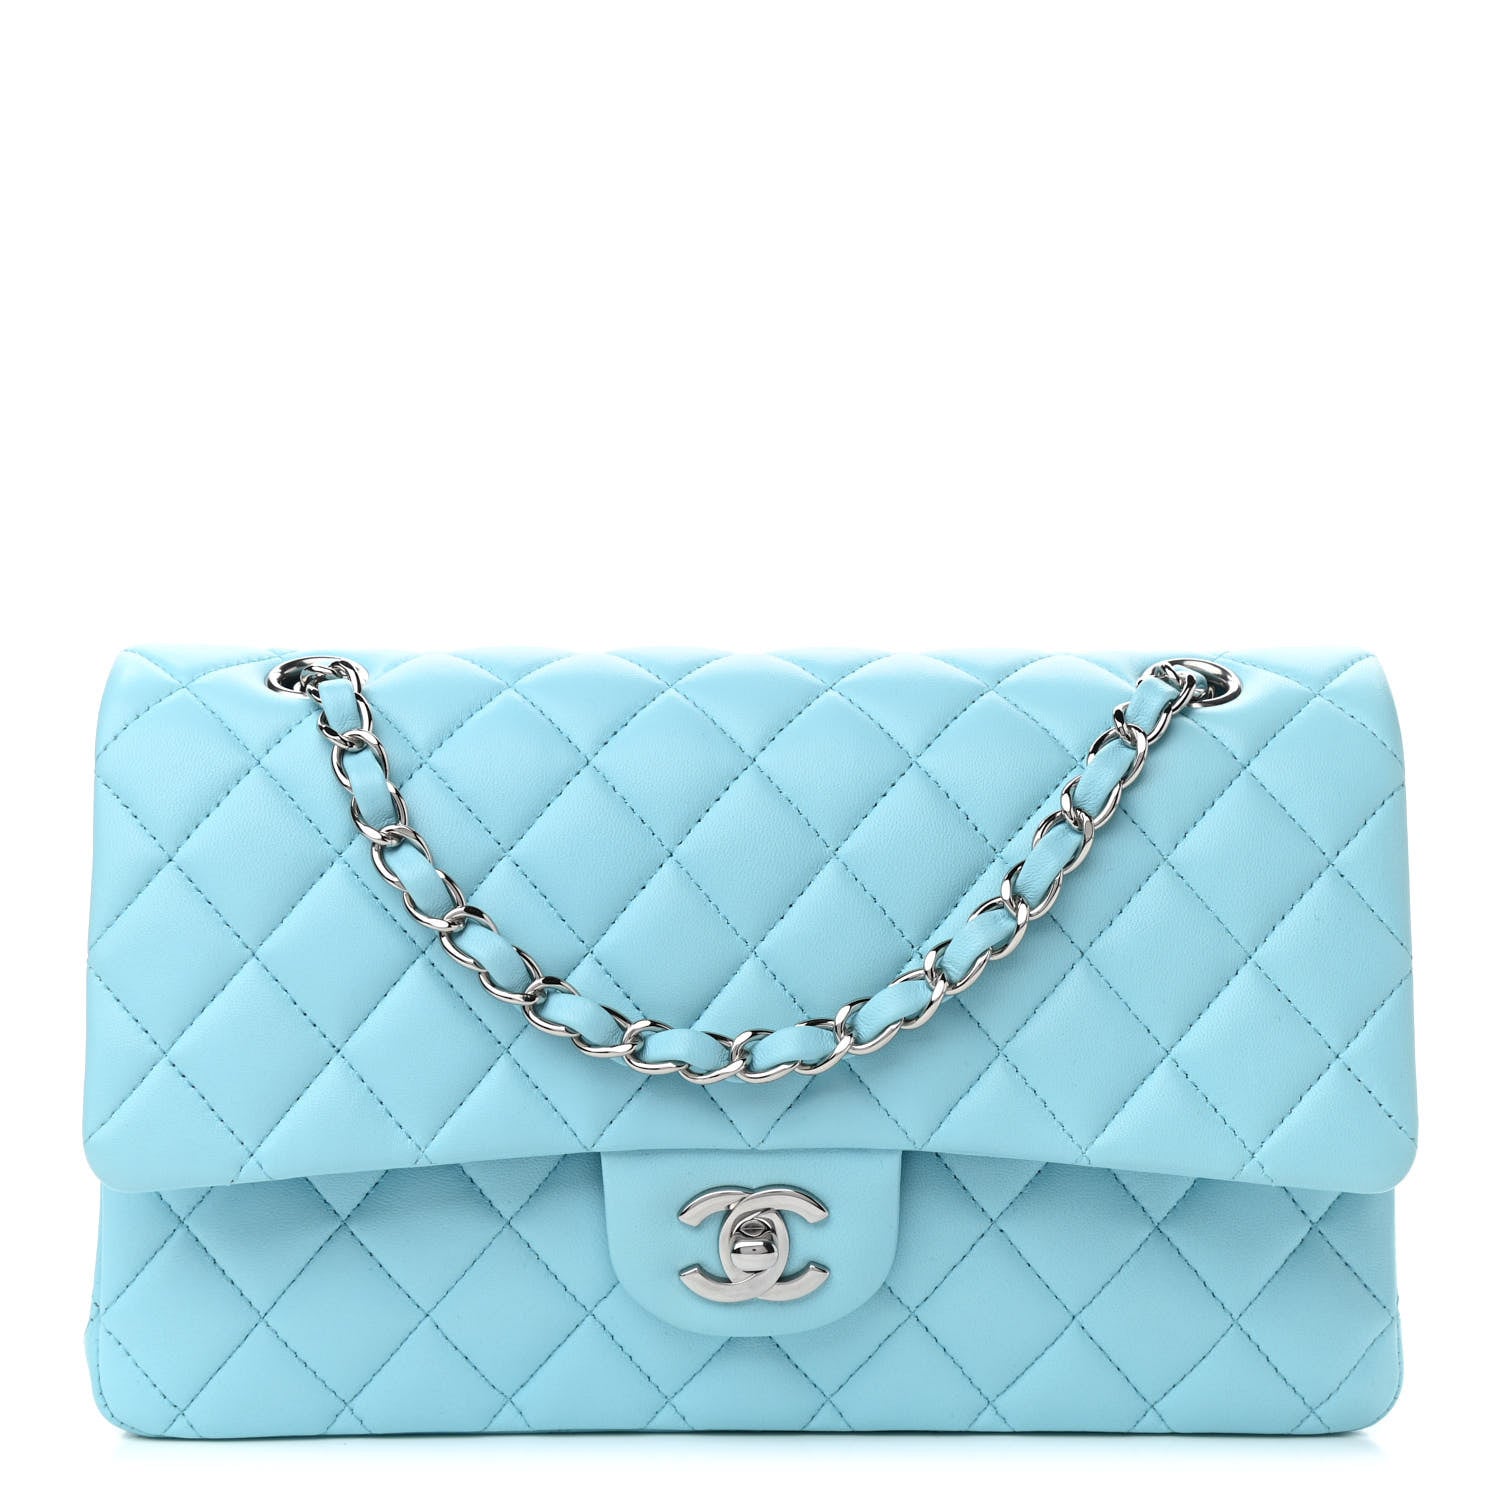 CHANEL CLASSIC MEDIUM QUILTED CALFSKIN DOUBLE FLAP BAG